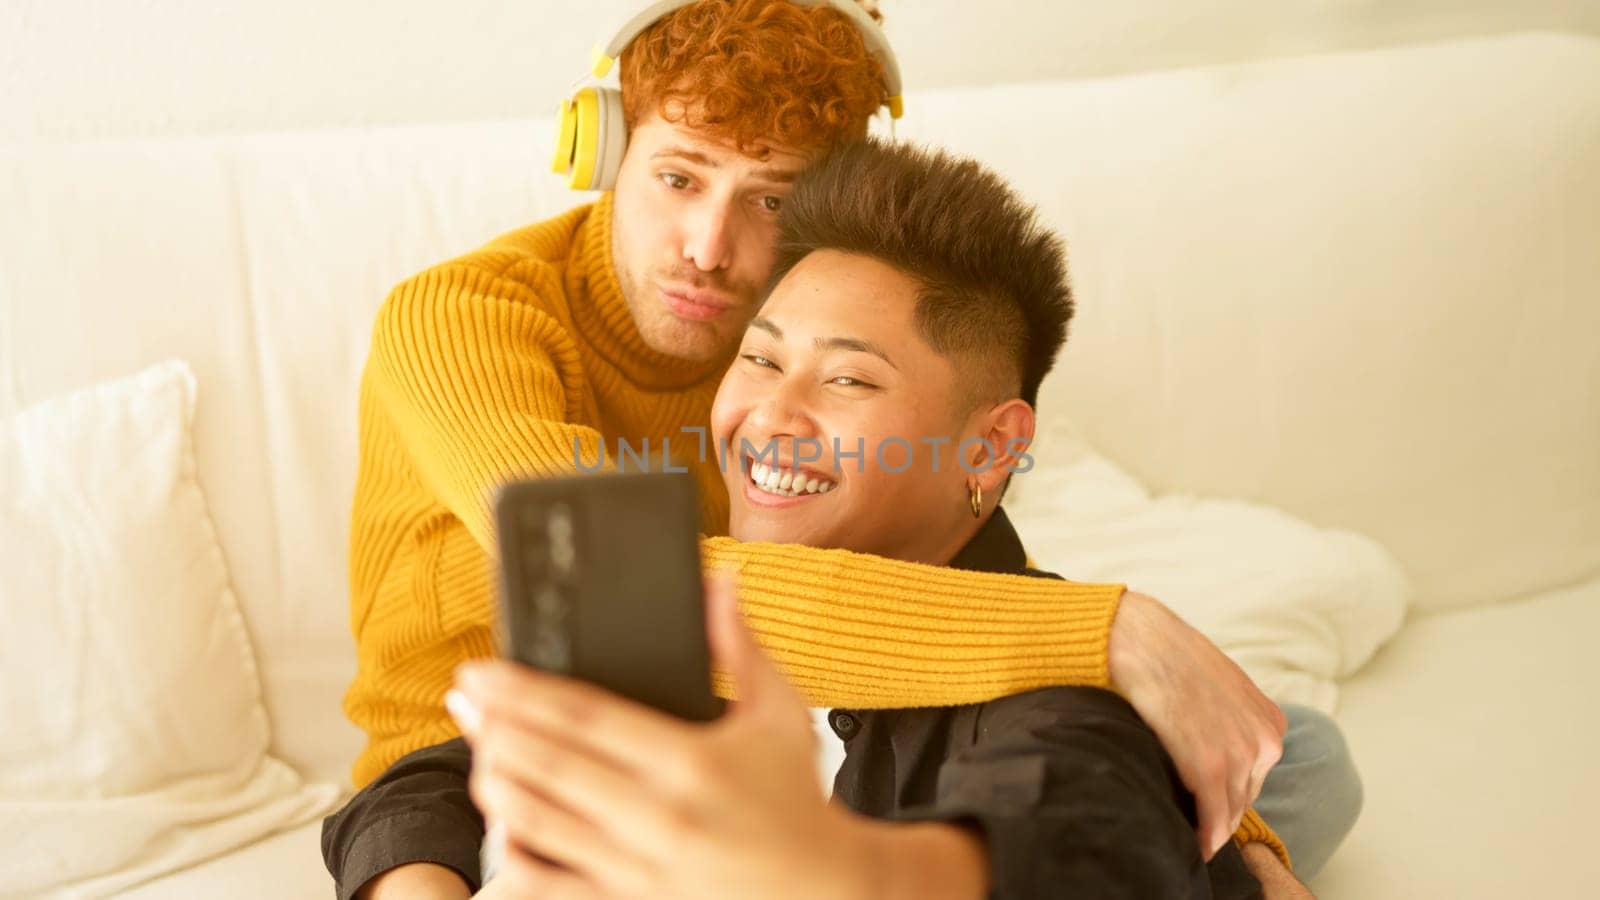 Gay couple embracing and smiling while taking selfie together sitting on the sofa